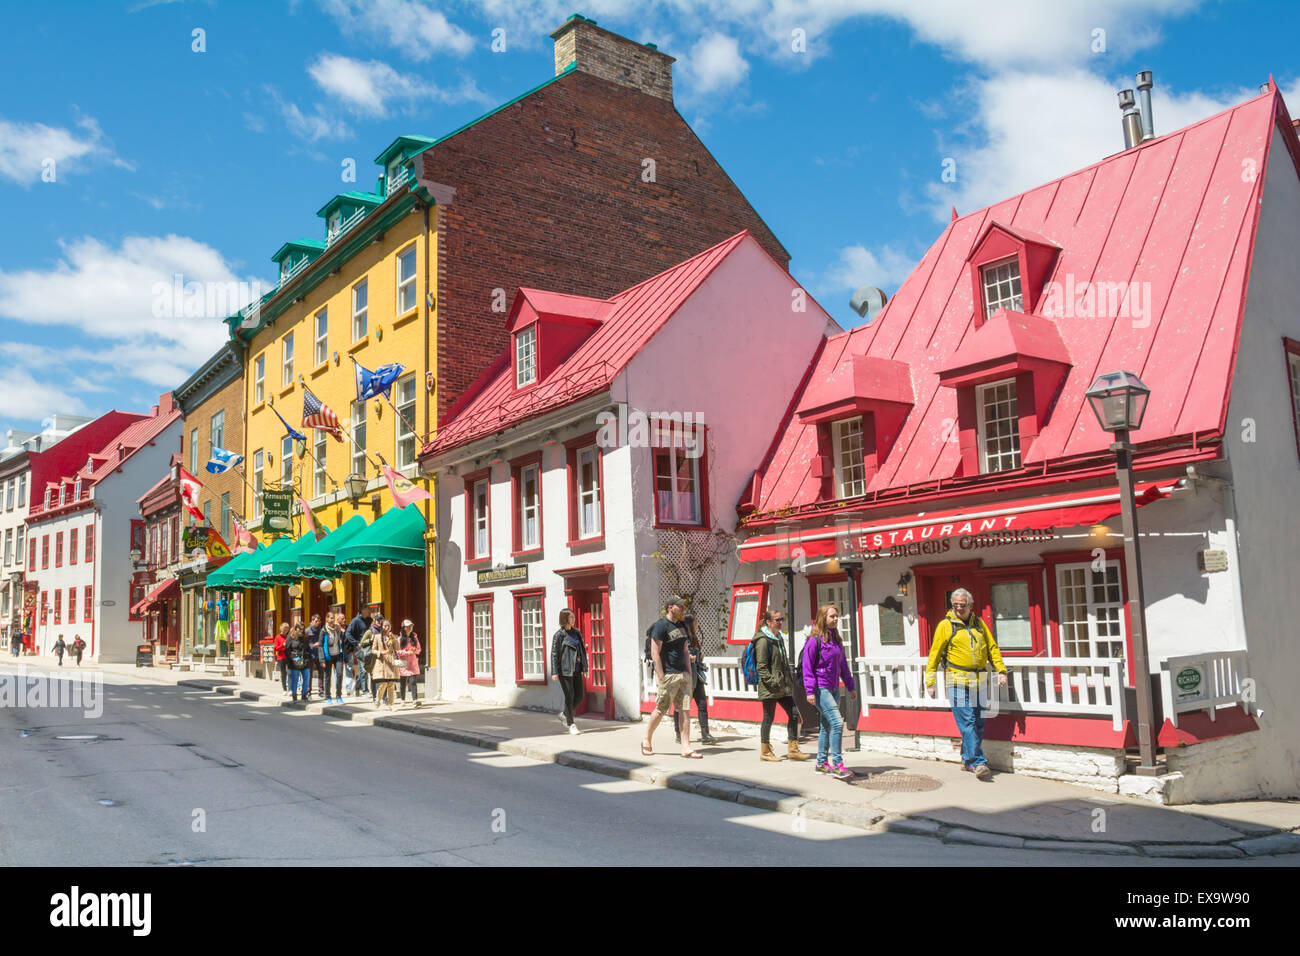 Restaurants and shops in old architectural styled buildings on saint Louis street in Old Quebec city. Canada. 23 May, 2015 Stock Photo